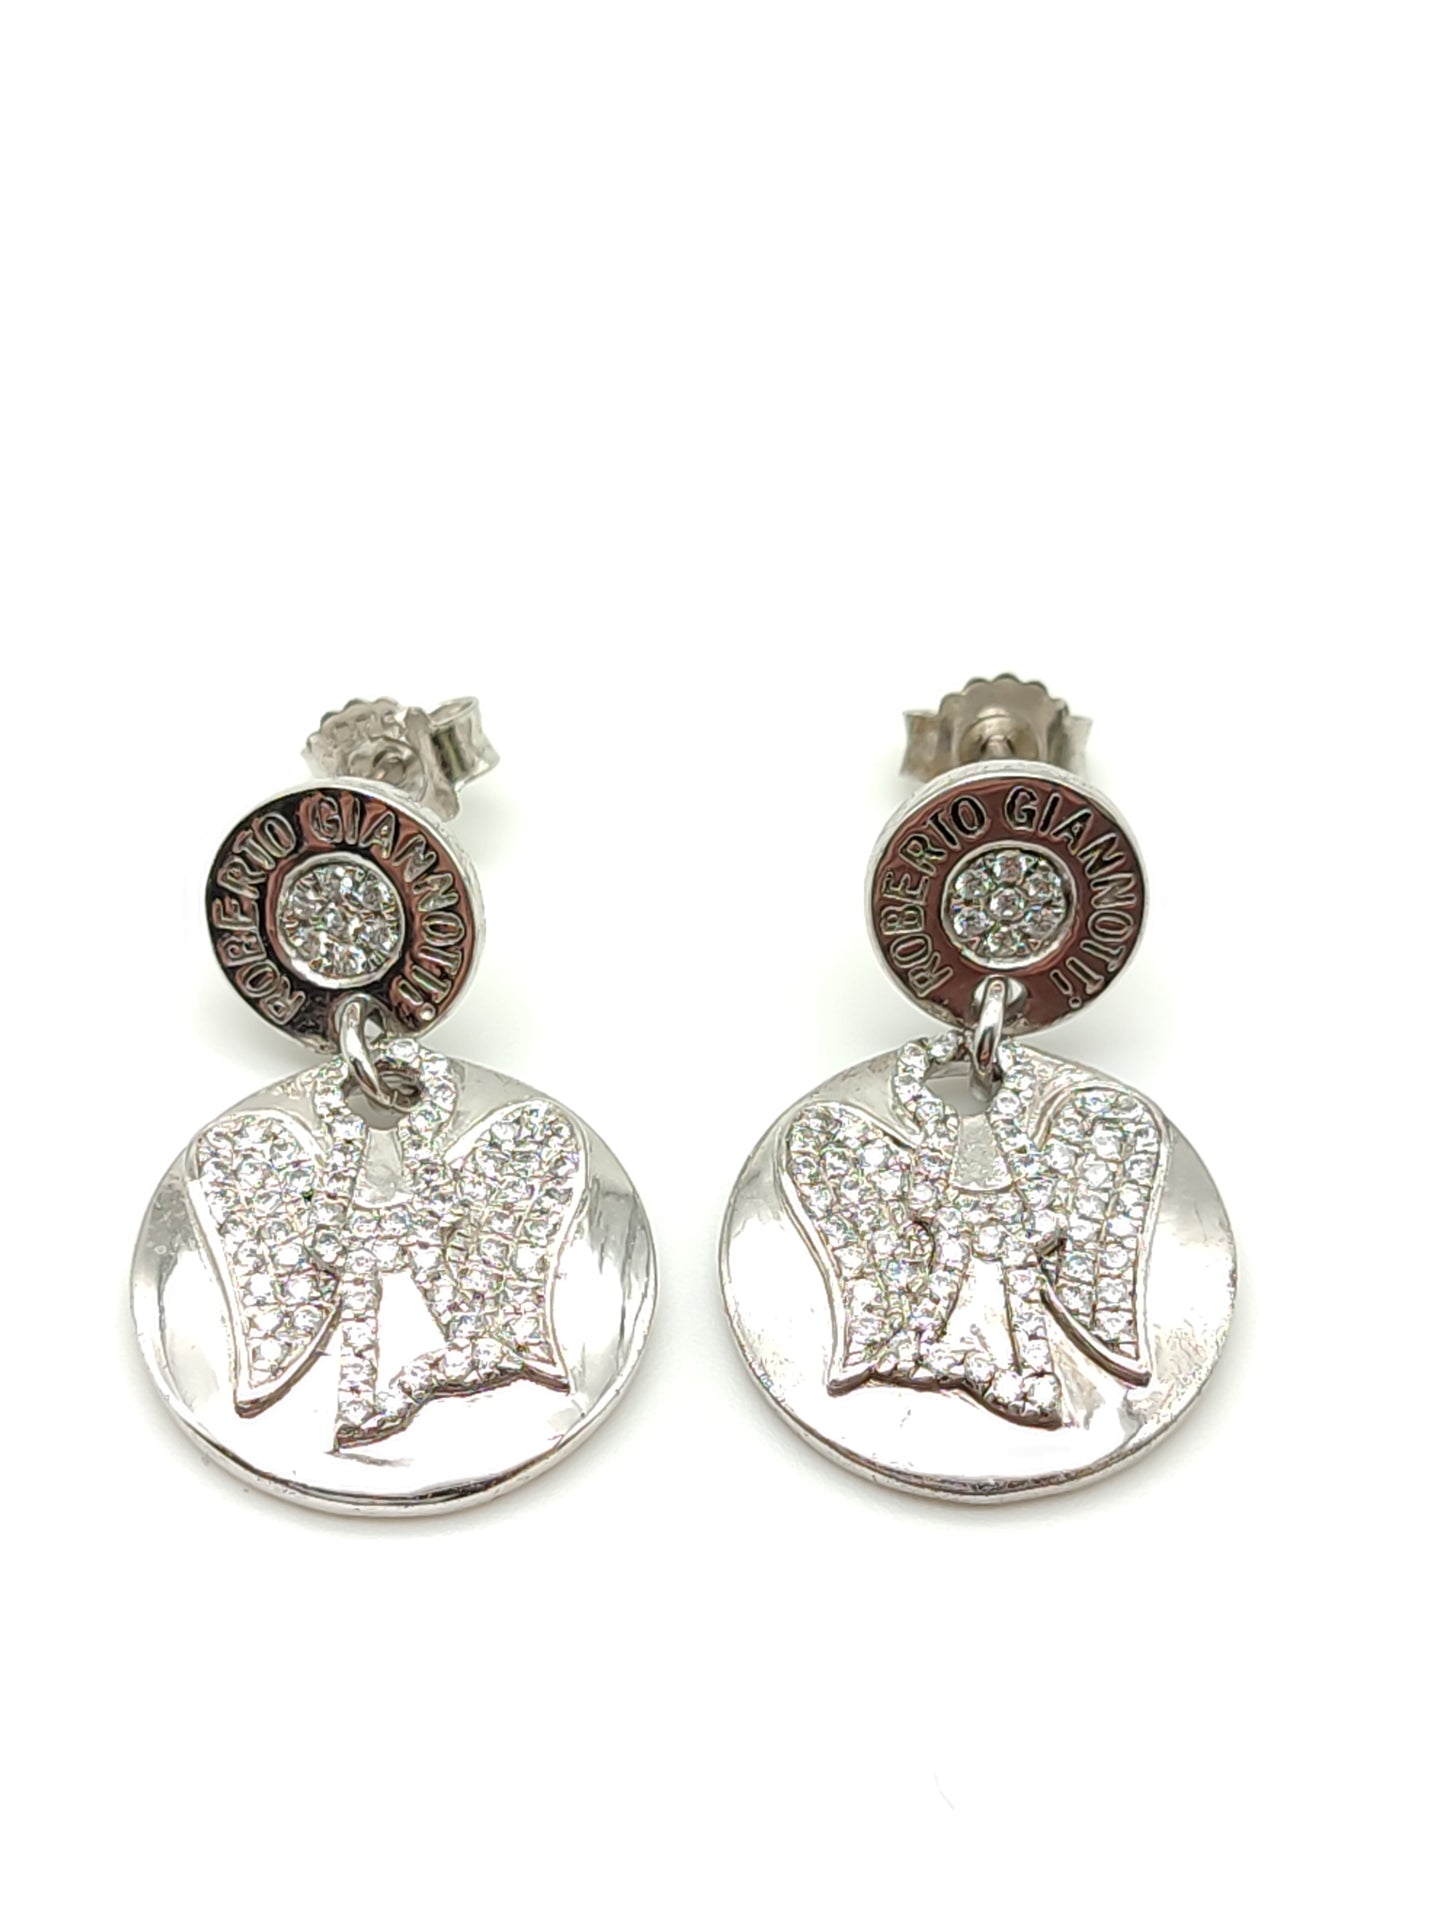 Silver earrings with zircon pavé angels